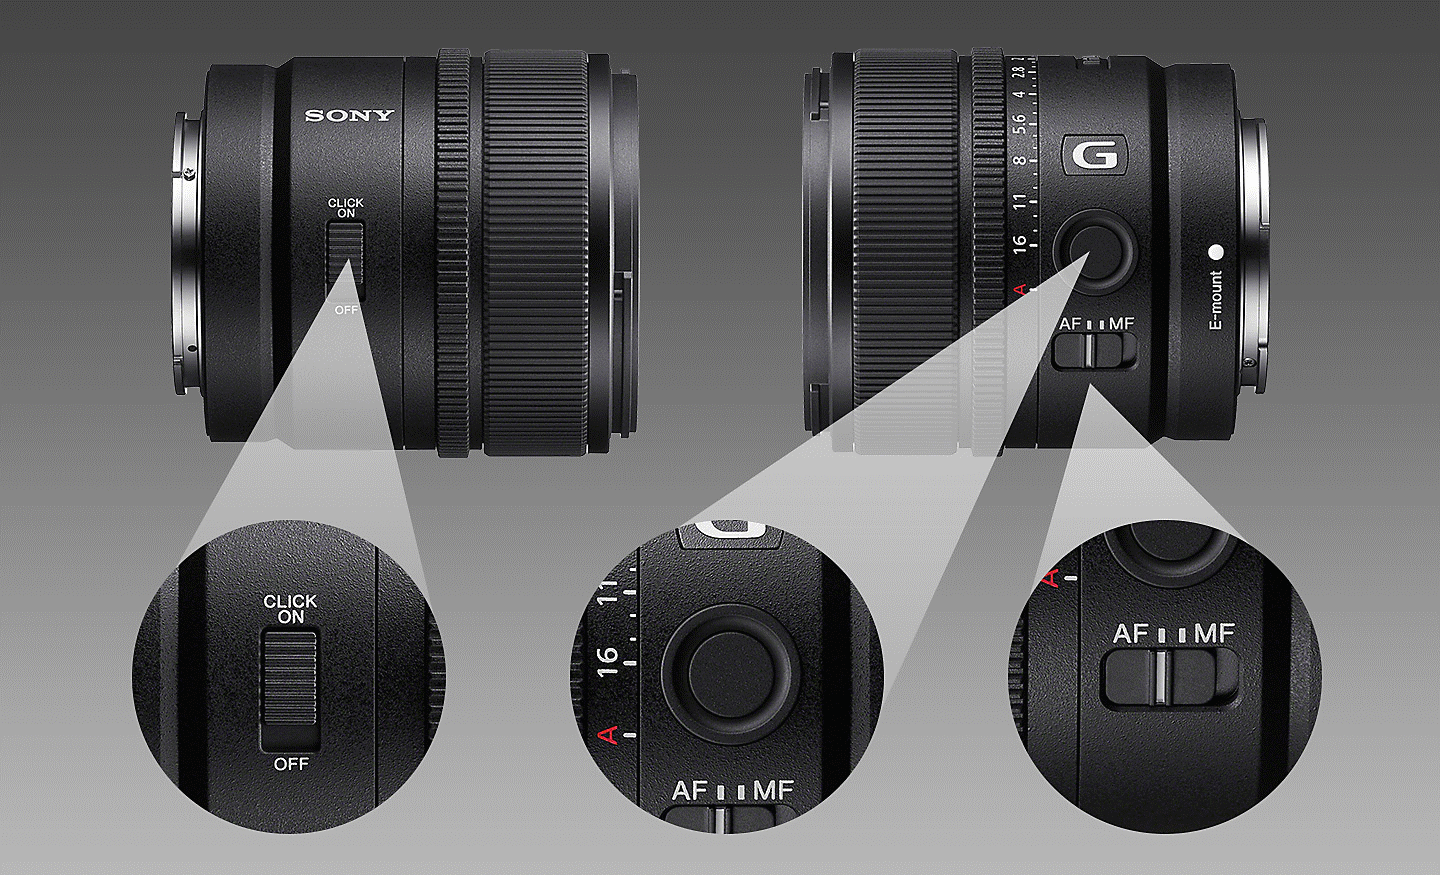 Product images of E 15-mm F1.4 G, right side and left side